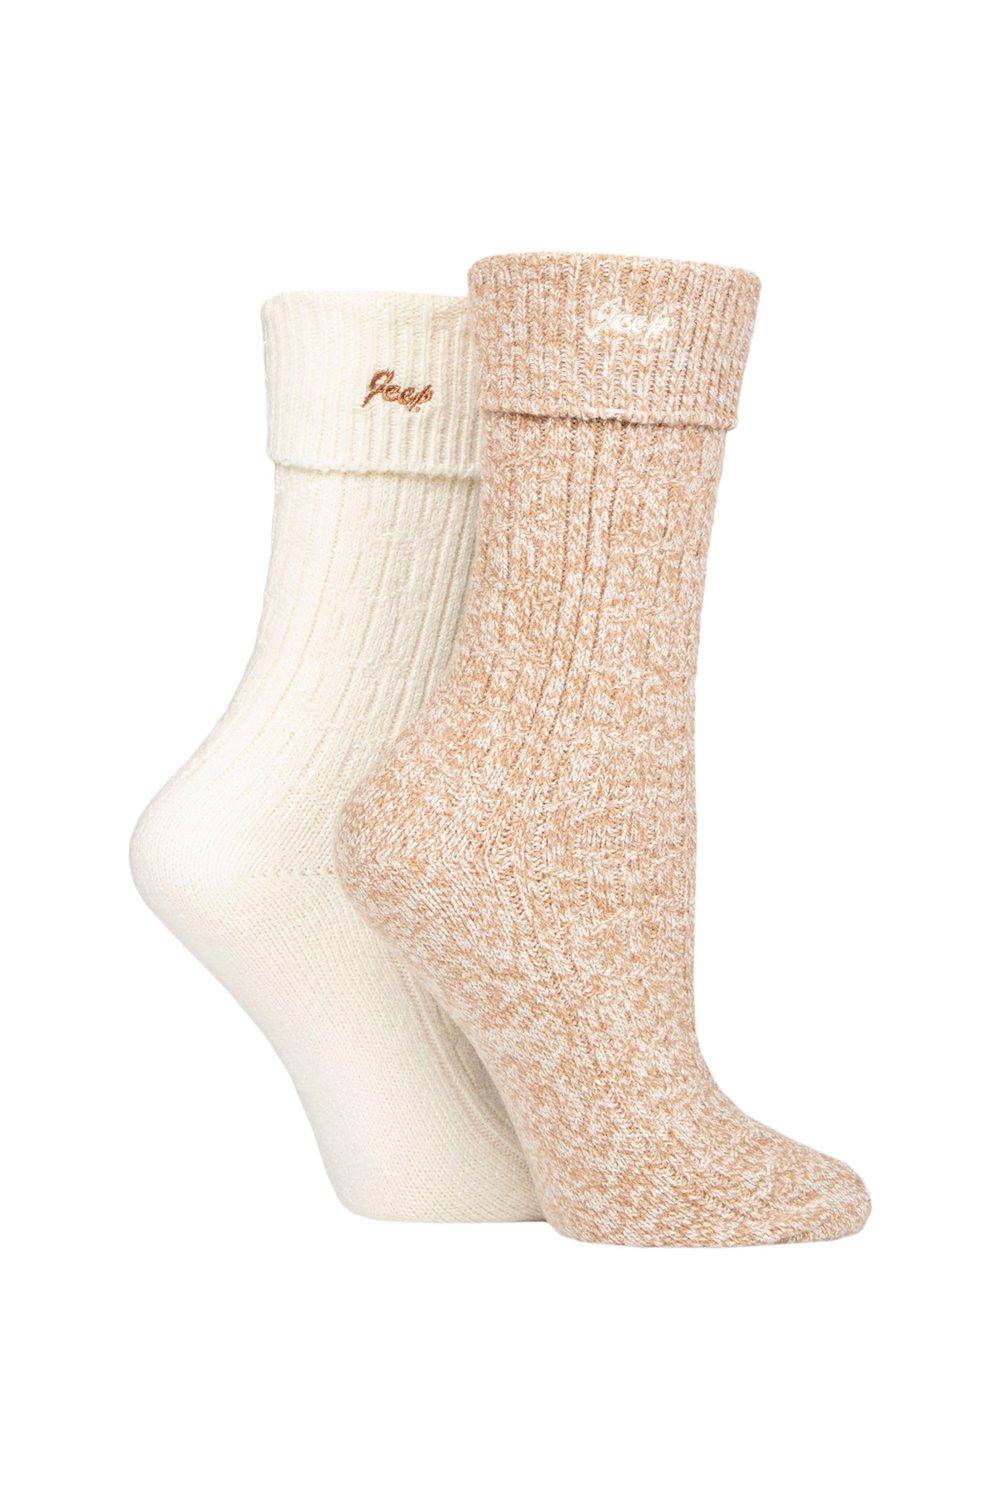 2 Pair Super Soft Turn Over Top Polyester Boot Socks